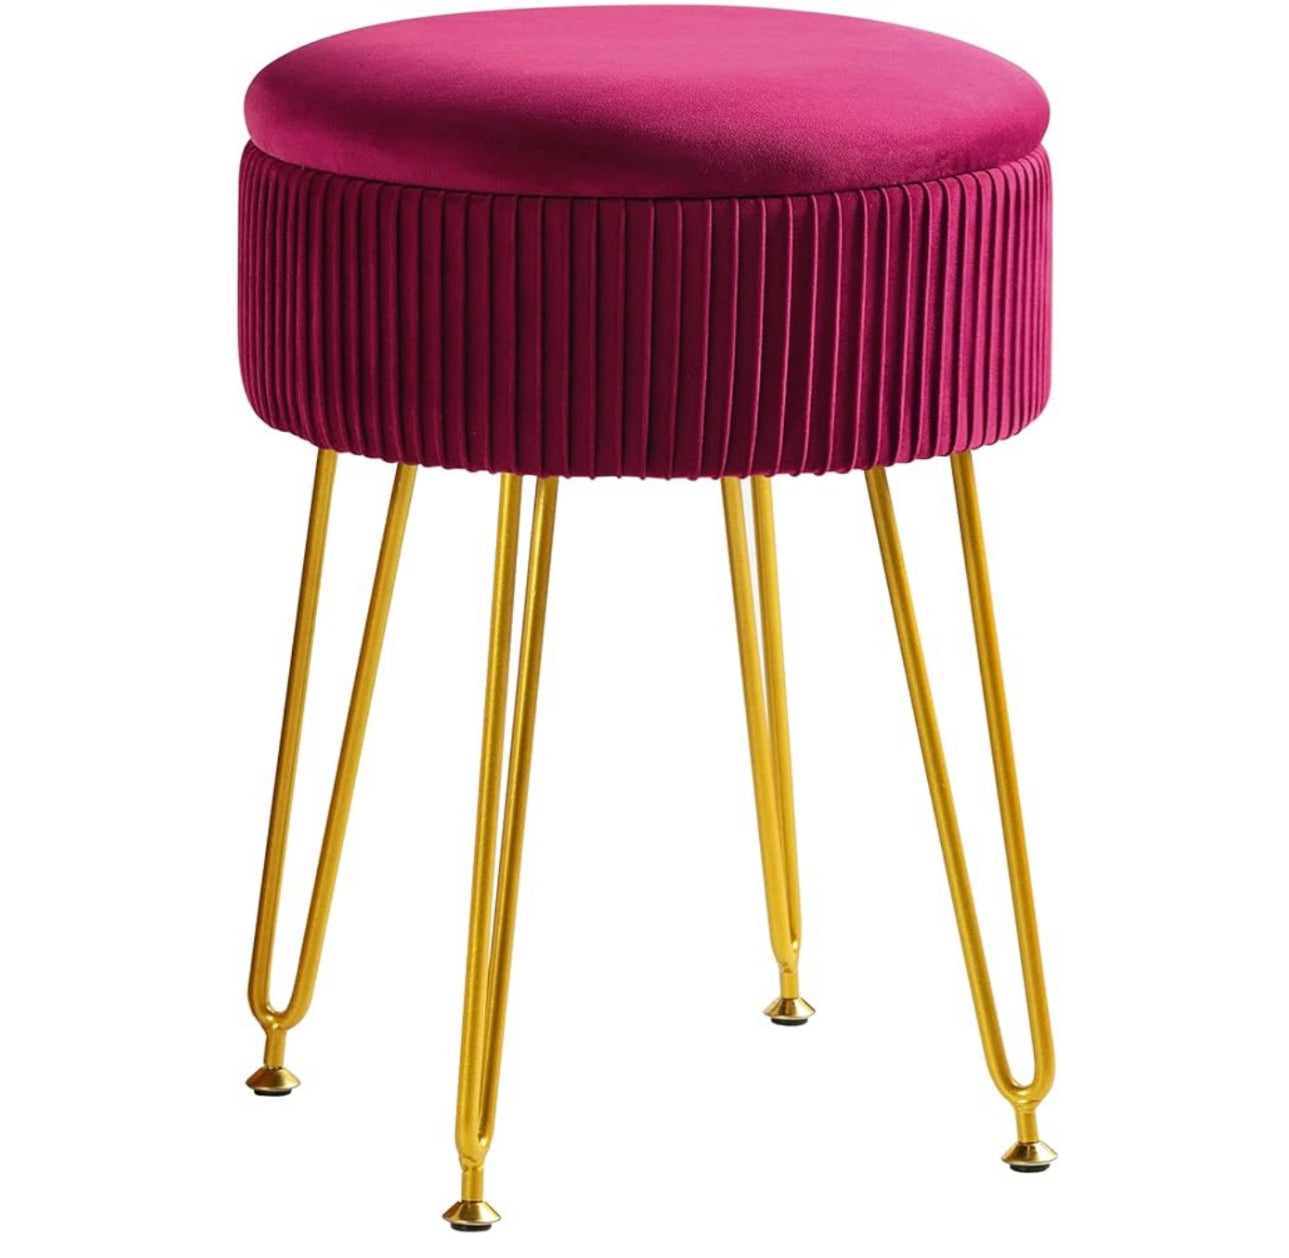 Velvet Vanity Stool Chair for Makeup Room, Rose Red Vanity Stool with Gold Legs,18” Height, Small Storage Ottoman Foot Ottoman Rest for Living Room, Bathroom